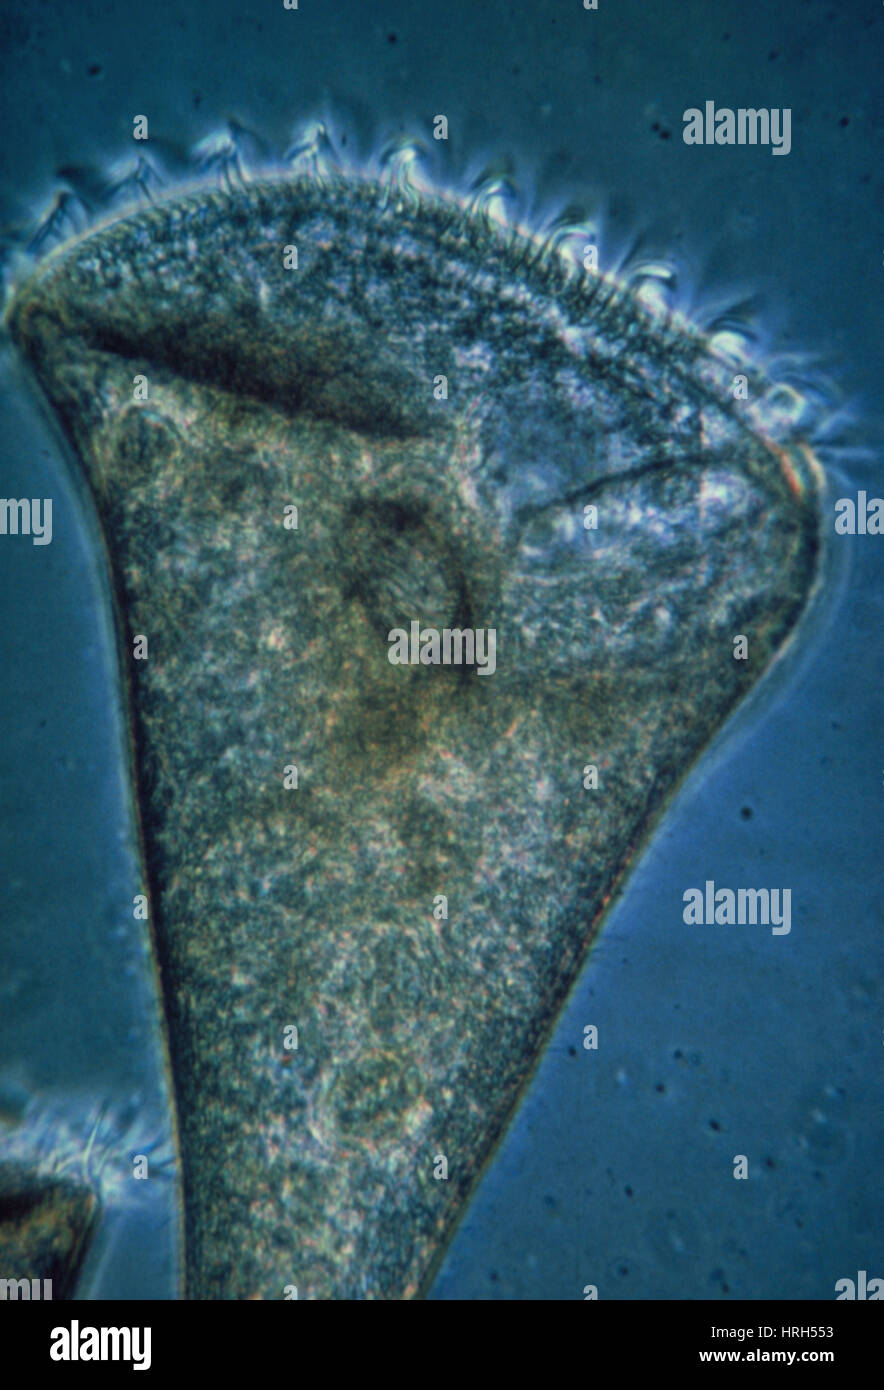 LM of Stentor sp., a ciliate protozoan Stock Photo